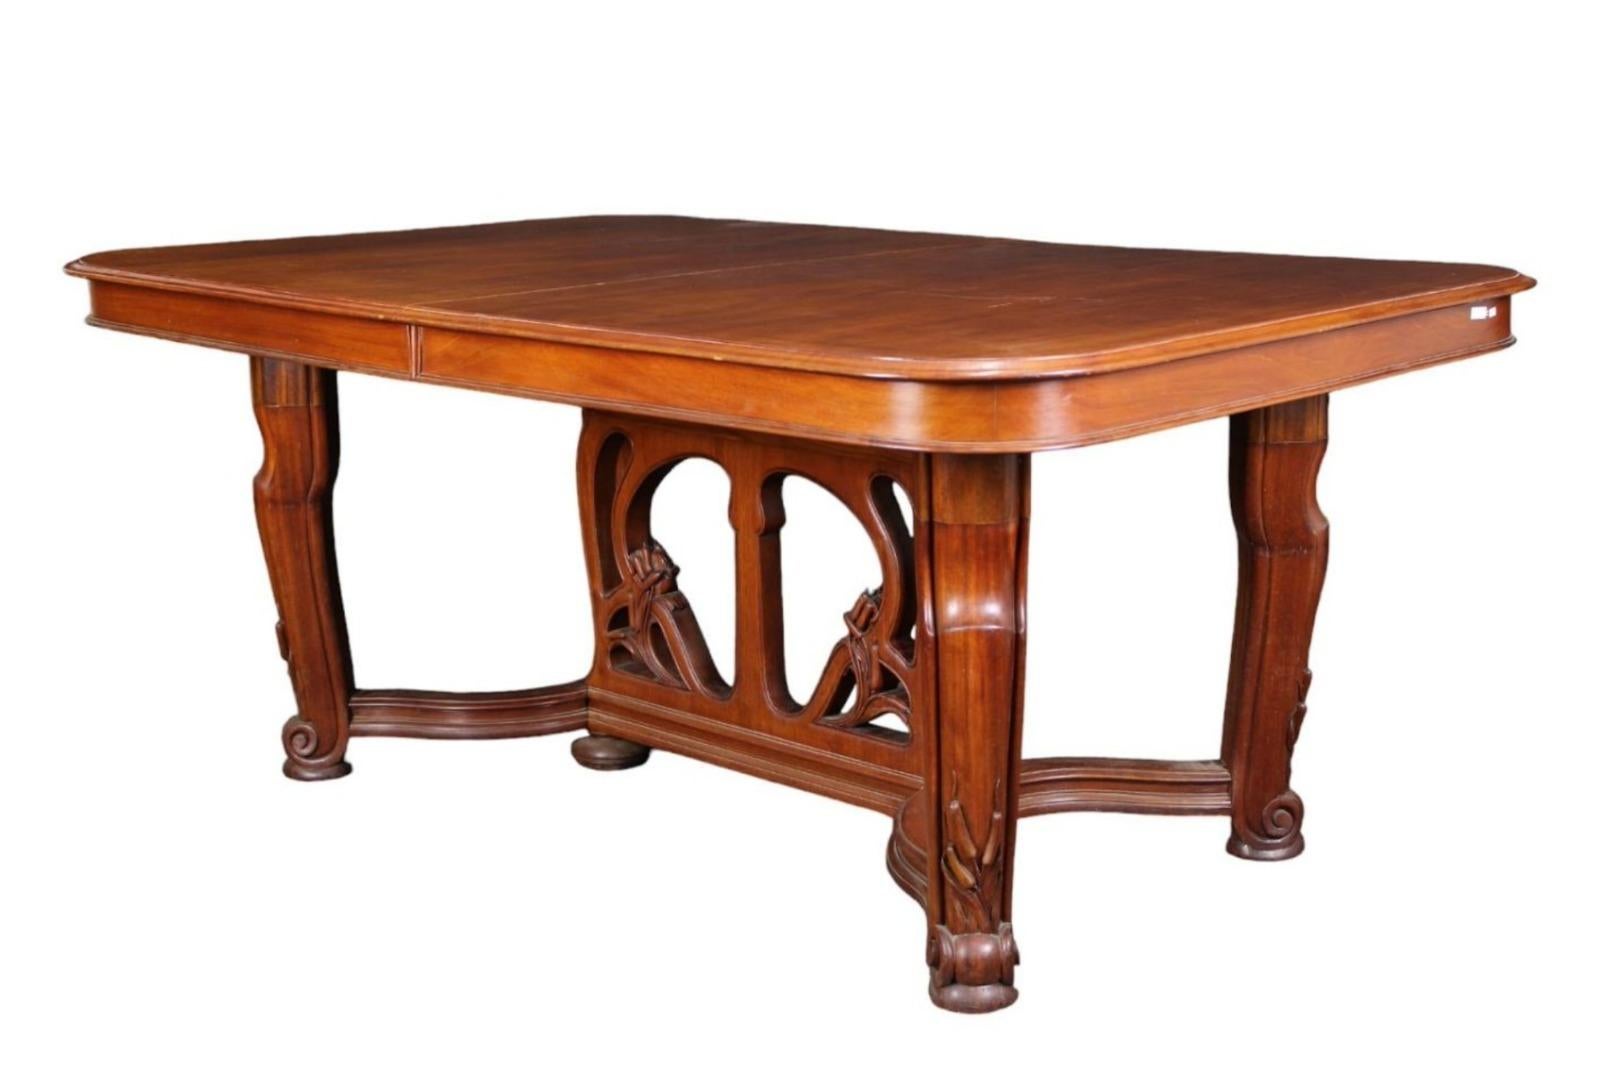 Hand-Crafted IMPORTANT LARGE 19th Century EXTENDABLE ITALIAN ART DECO TABLE For Sale